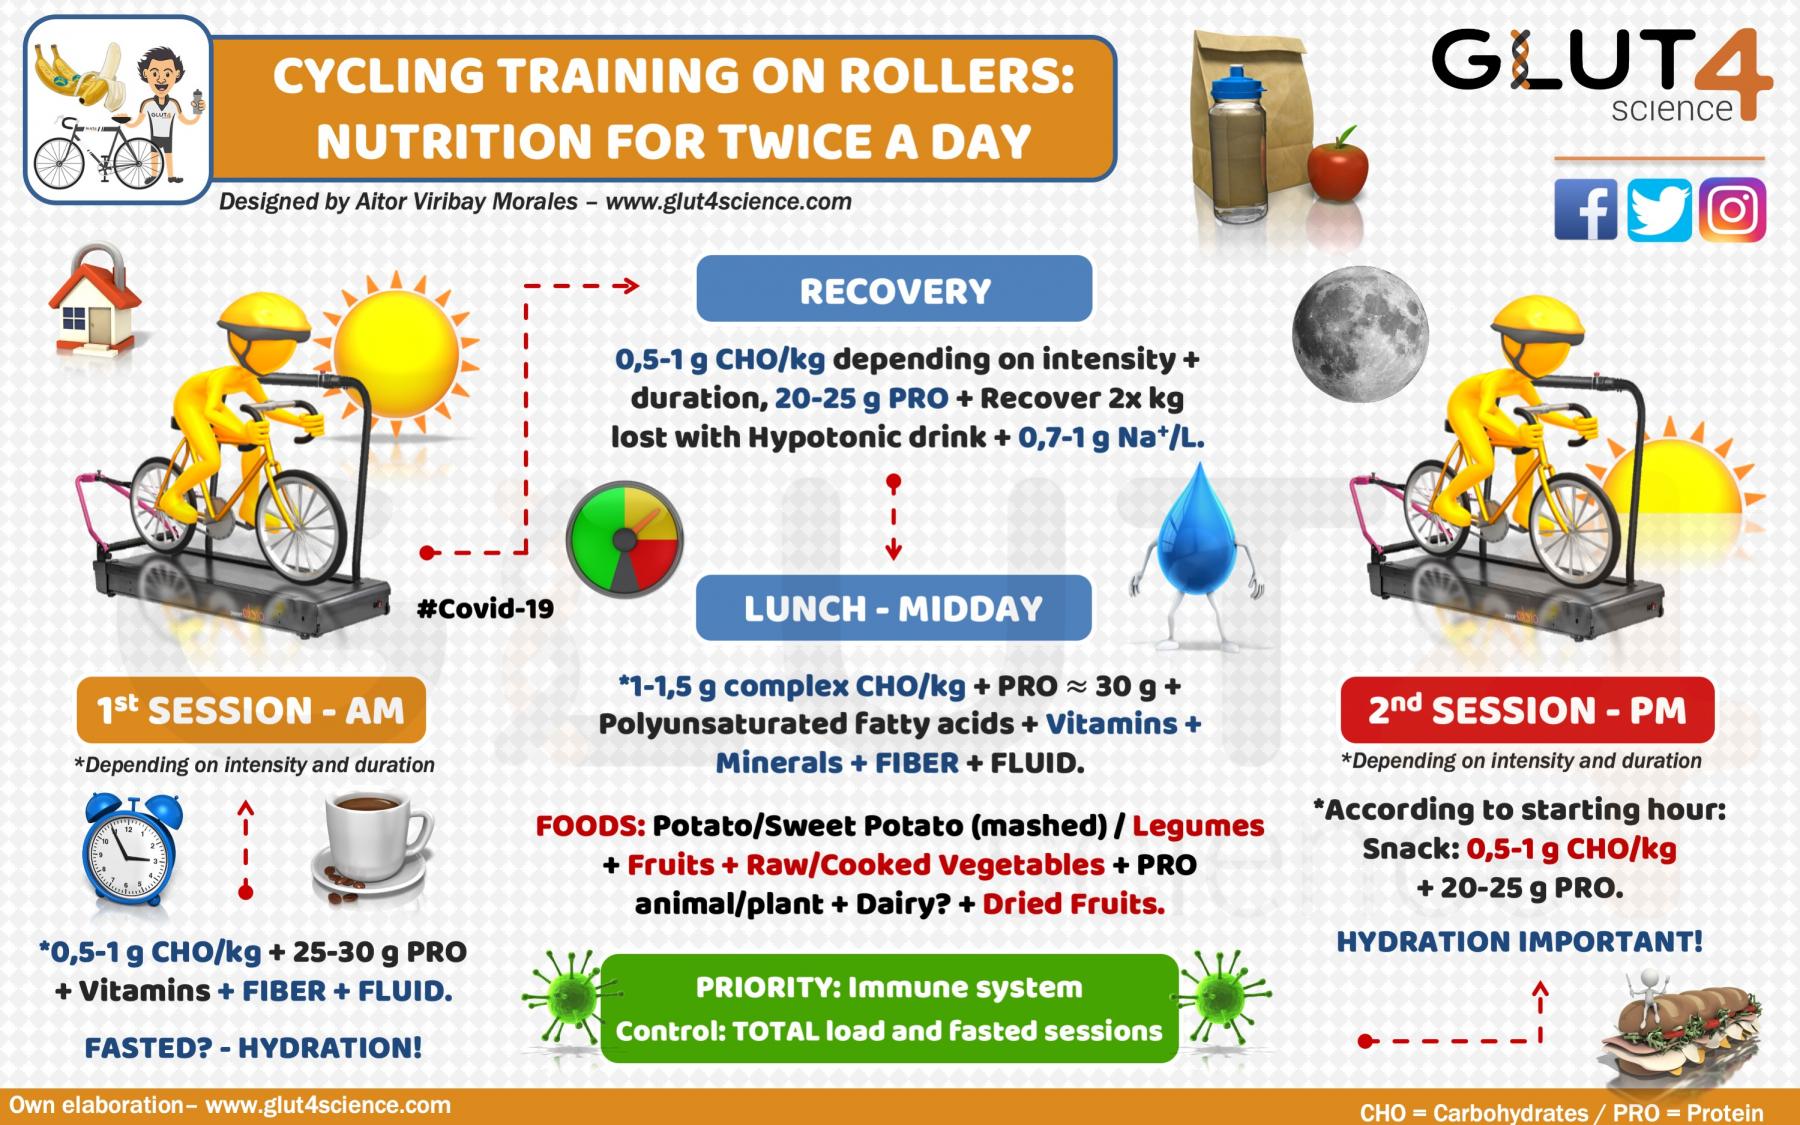 Nutrition for Twice a Day Training on the rollers